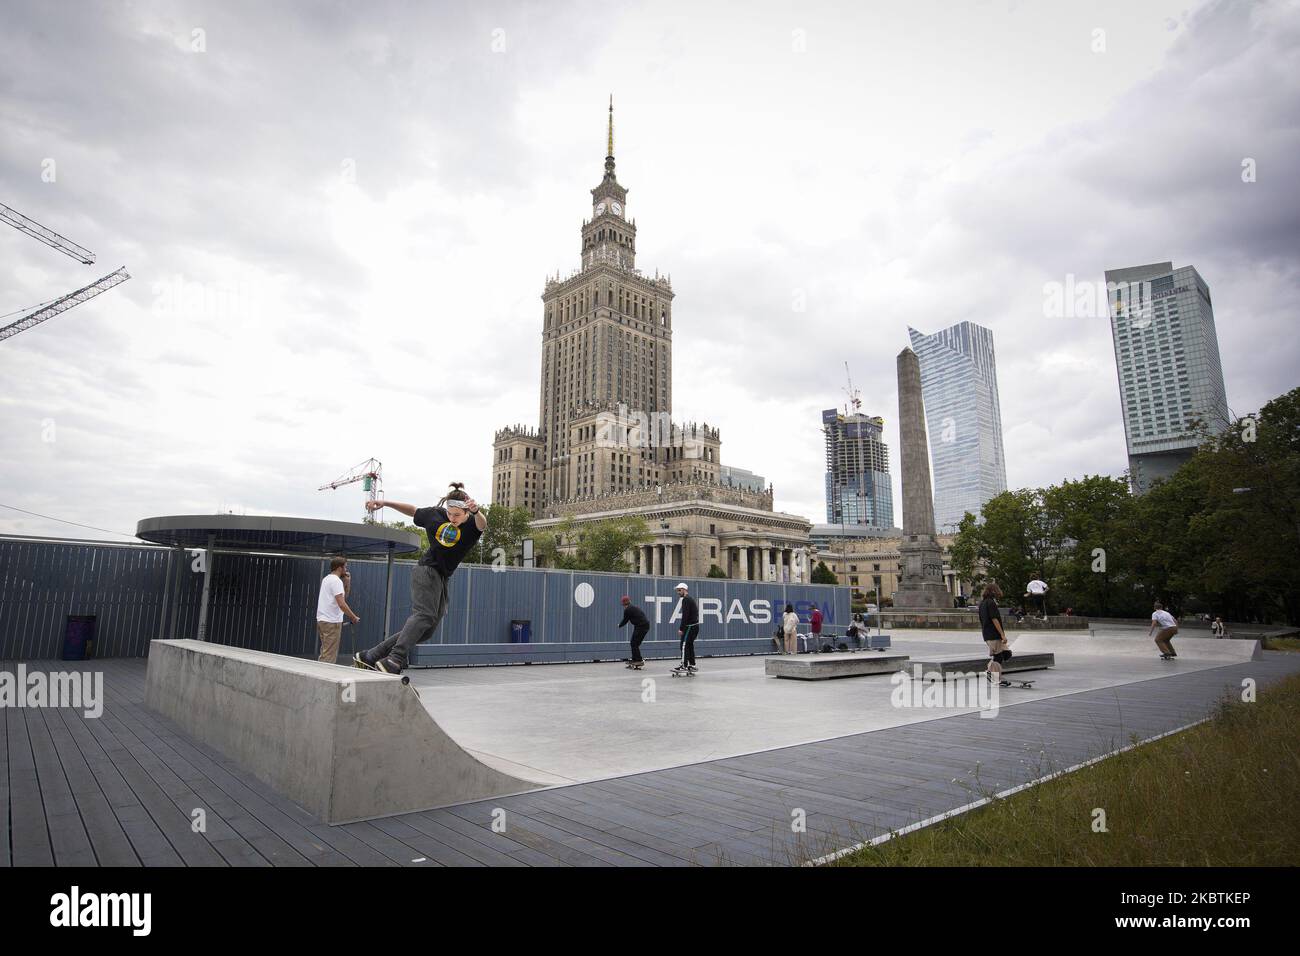 People are seen skating on a ramp near the Palace of Culture and Sciences in Warsaw, Poland on July 13, 2020. Incumbent Duda has won the final round of the presidential elections with less than three percent of the votes against his opponent, mayor of Warsaw Rafal Trzaskowski. Incumbent Duda has won the final round of the presidential elections with less than three percent of the votes against his opponent, mayor of Warsaw Rafal Trzaskowski. Of the age groups that voted for opponent the majority was younger than 50 with nearly 70 percent of unde 30's voting for Trzaskowski. (Photo by Jaap Arri Stock Photo